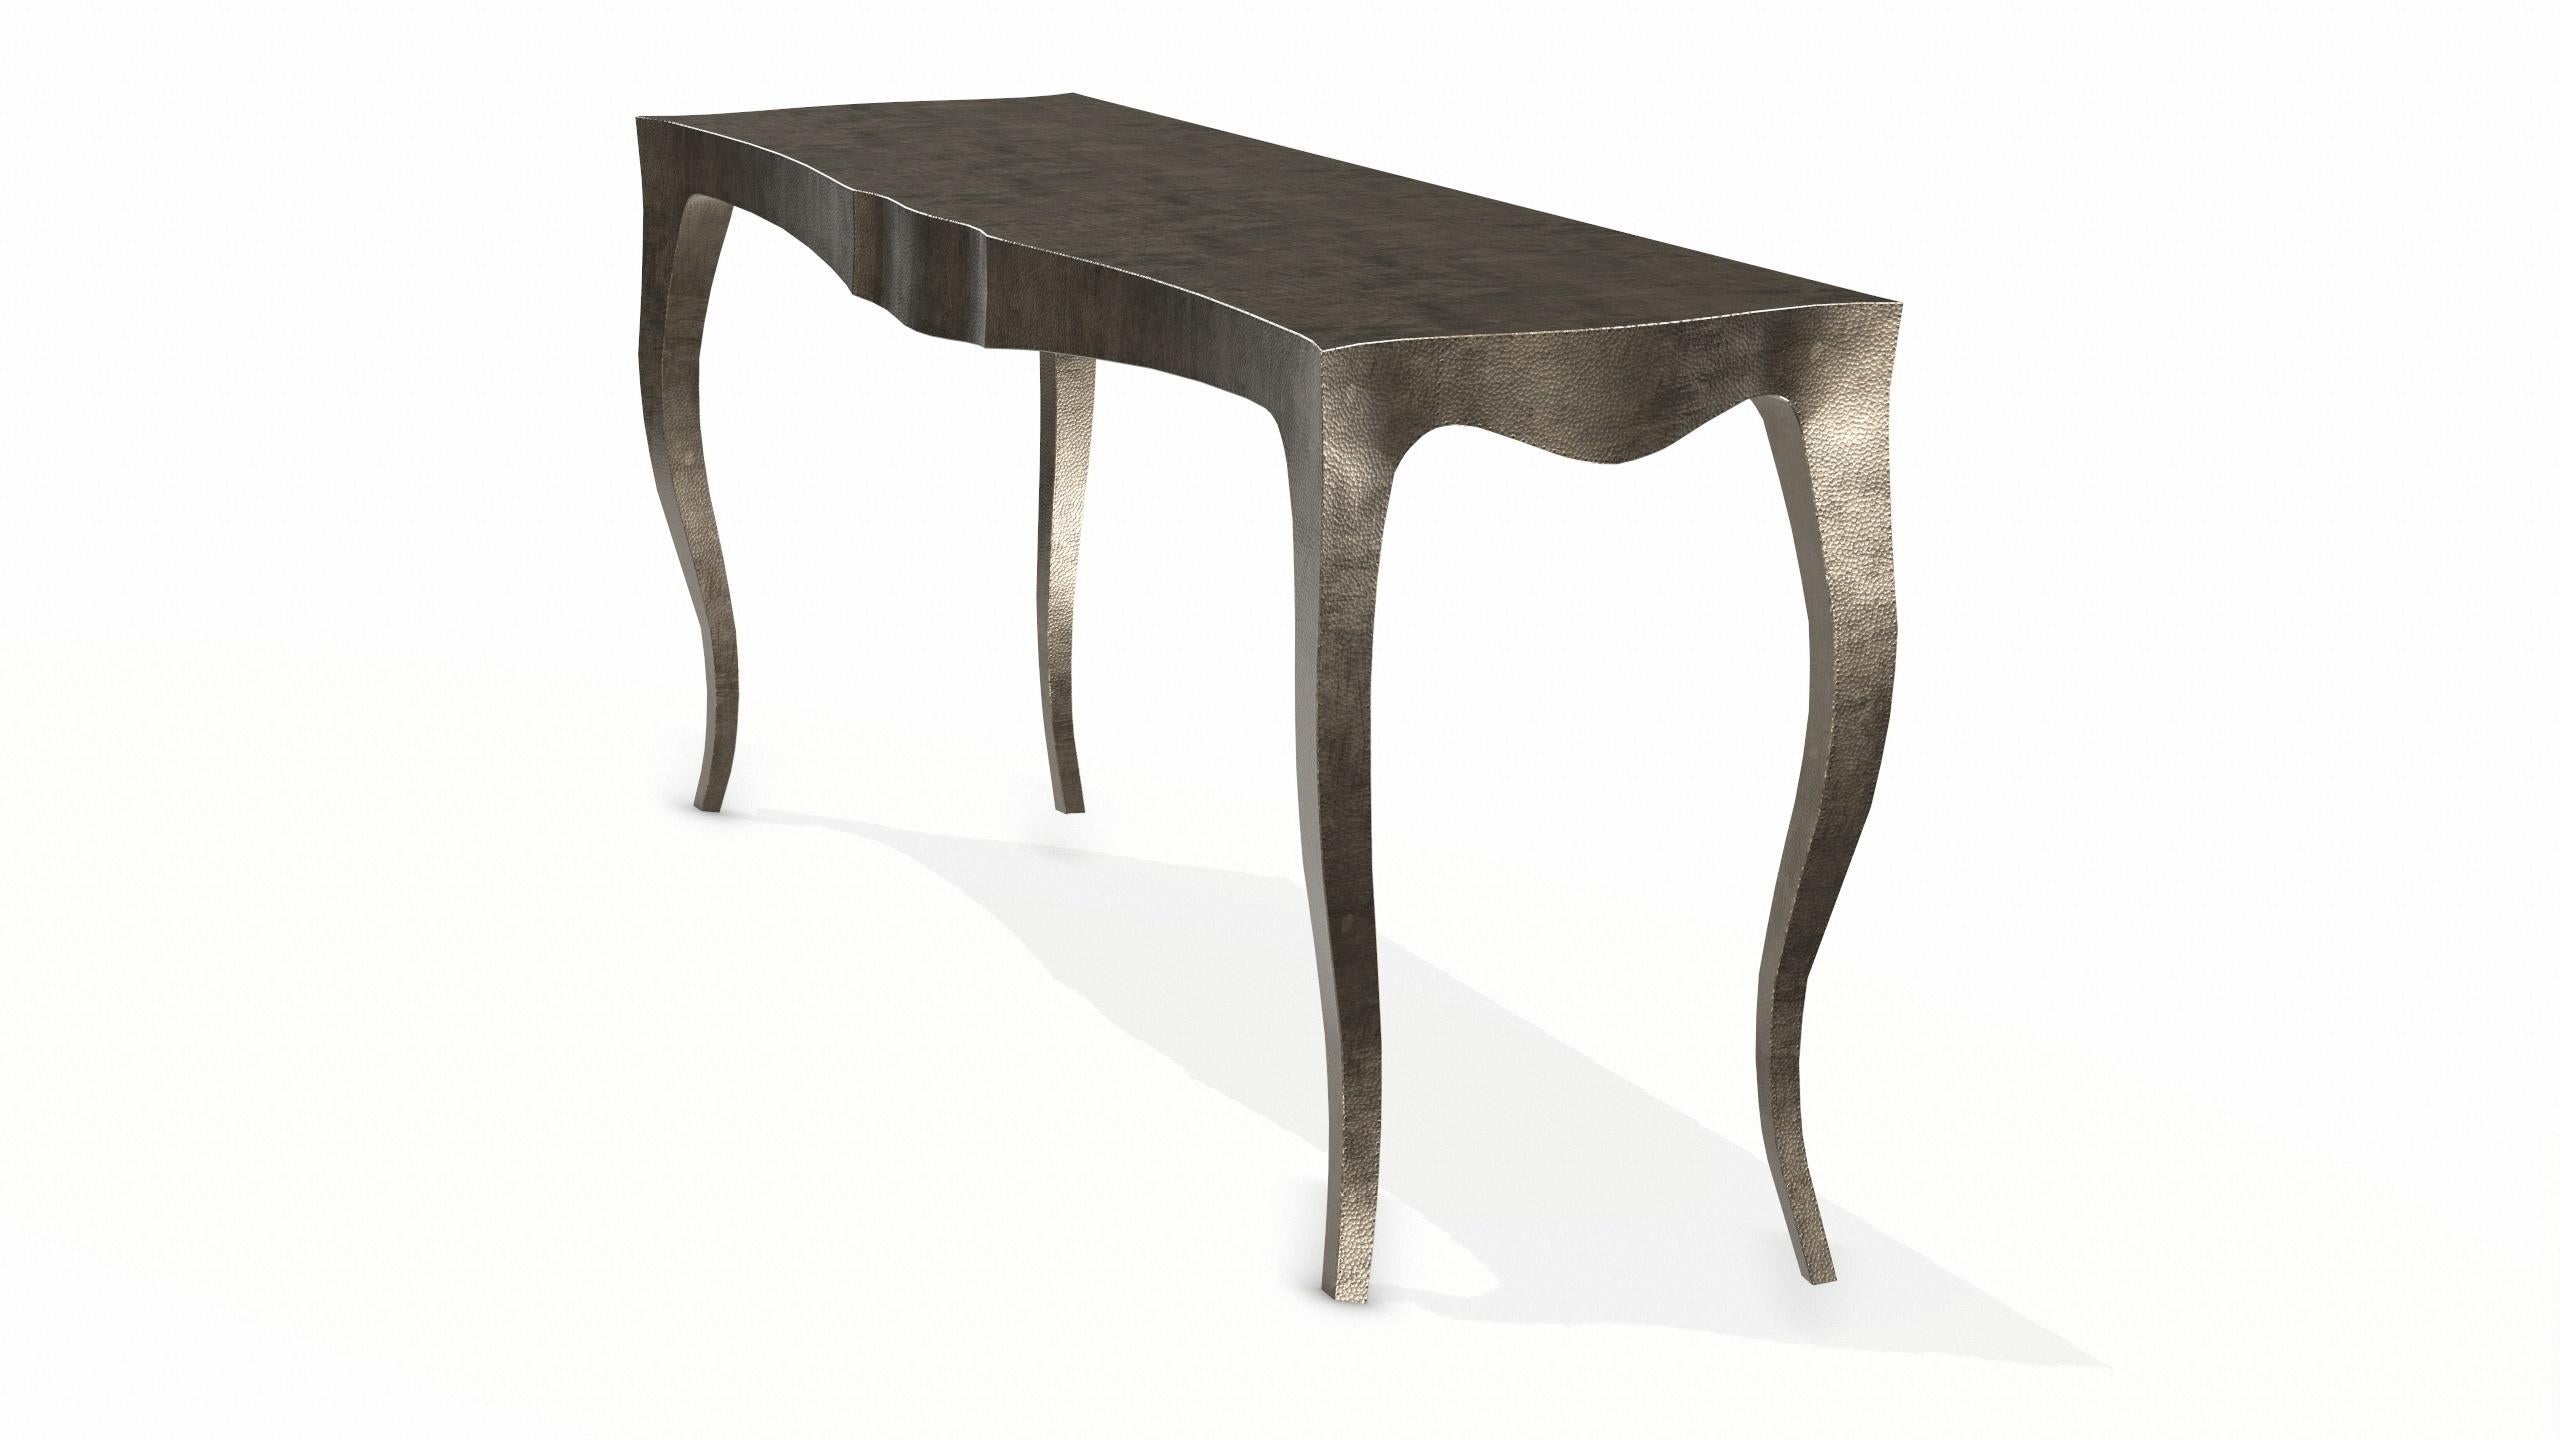 Woodwork Louise Console Art Deco Side Tables Mid. Hammered Antique Bronze by Paul Mathieu For Sale